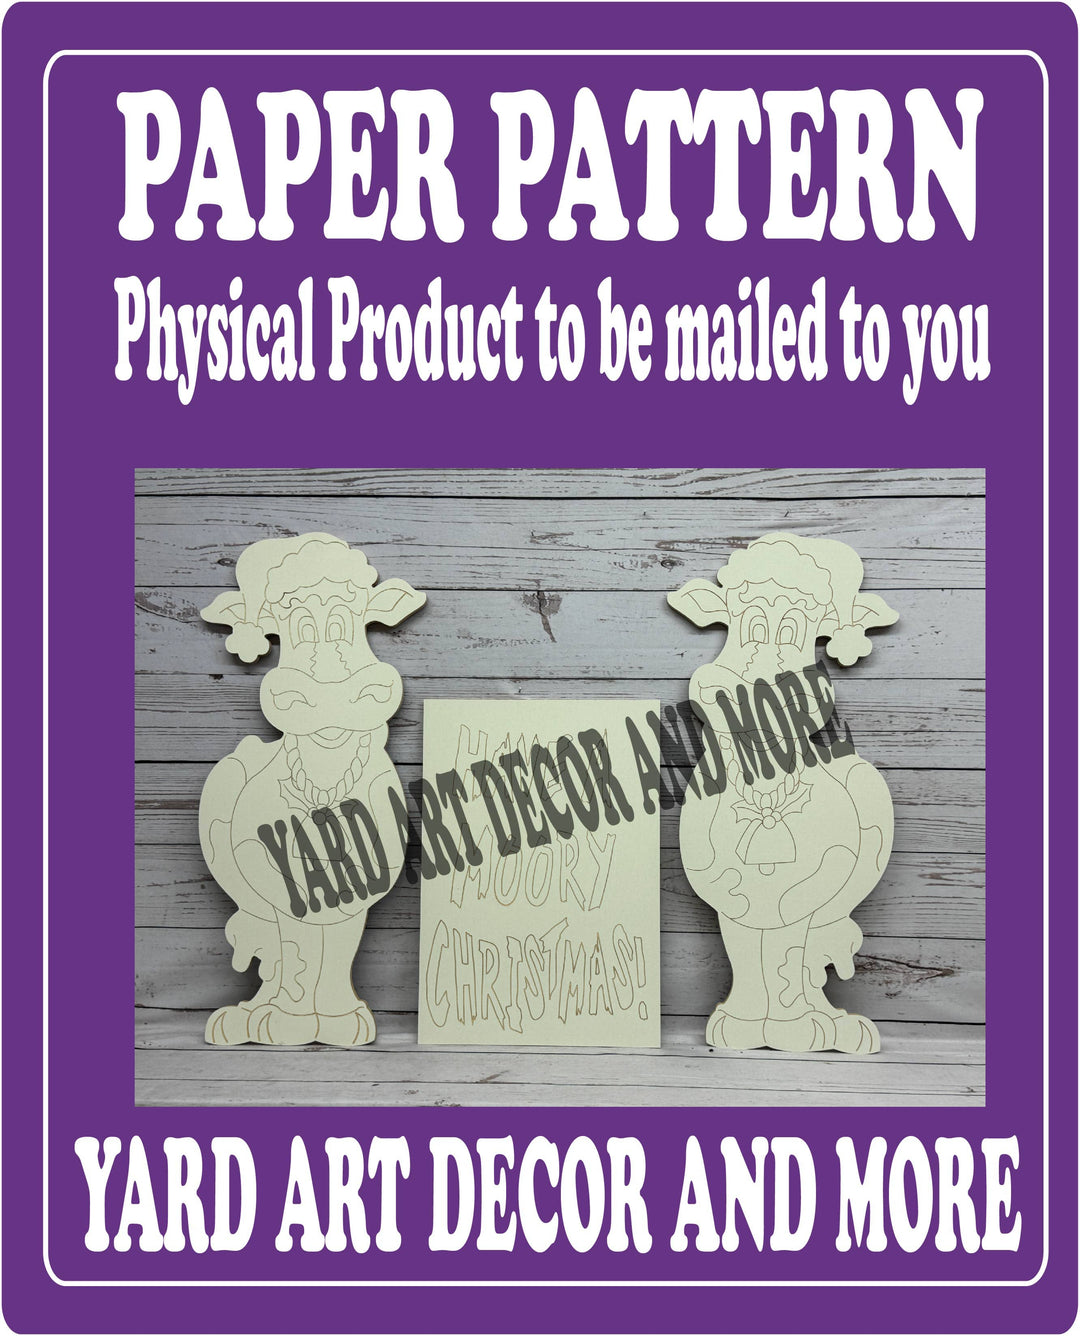 Have a Moory Christmas 3PC Cow Set Yard Art Paper Pattern